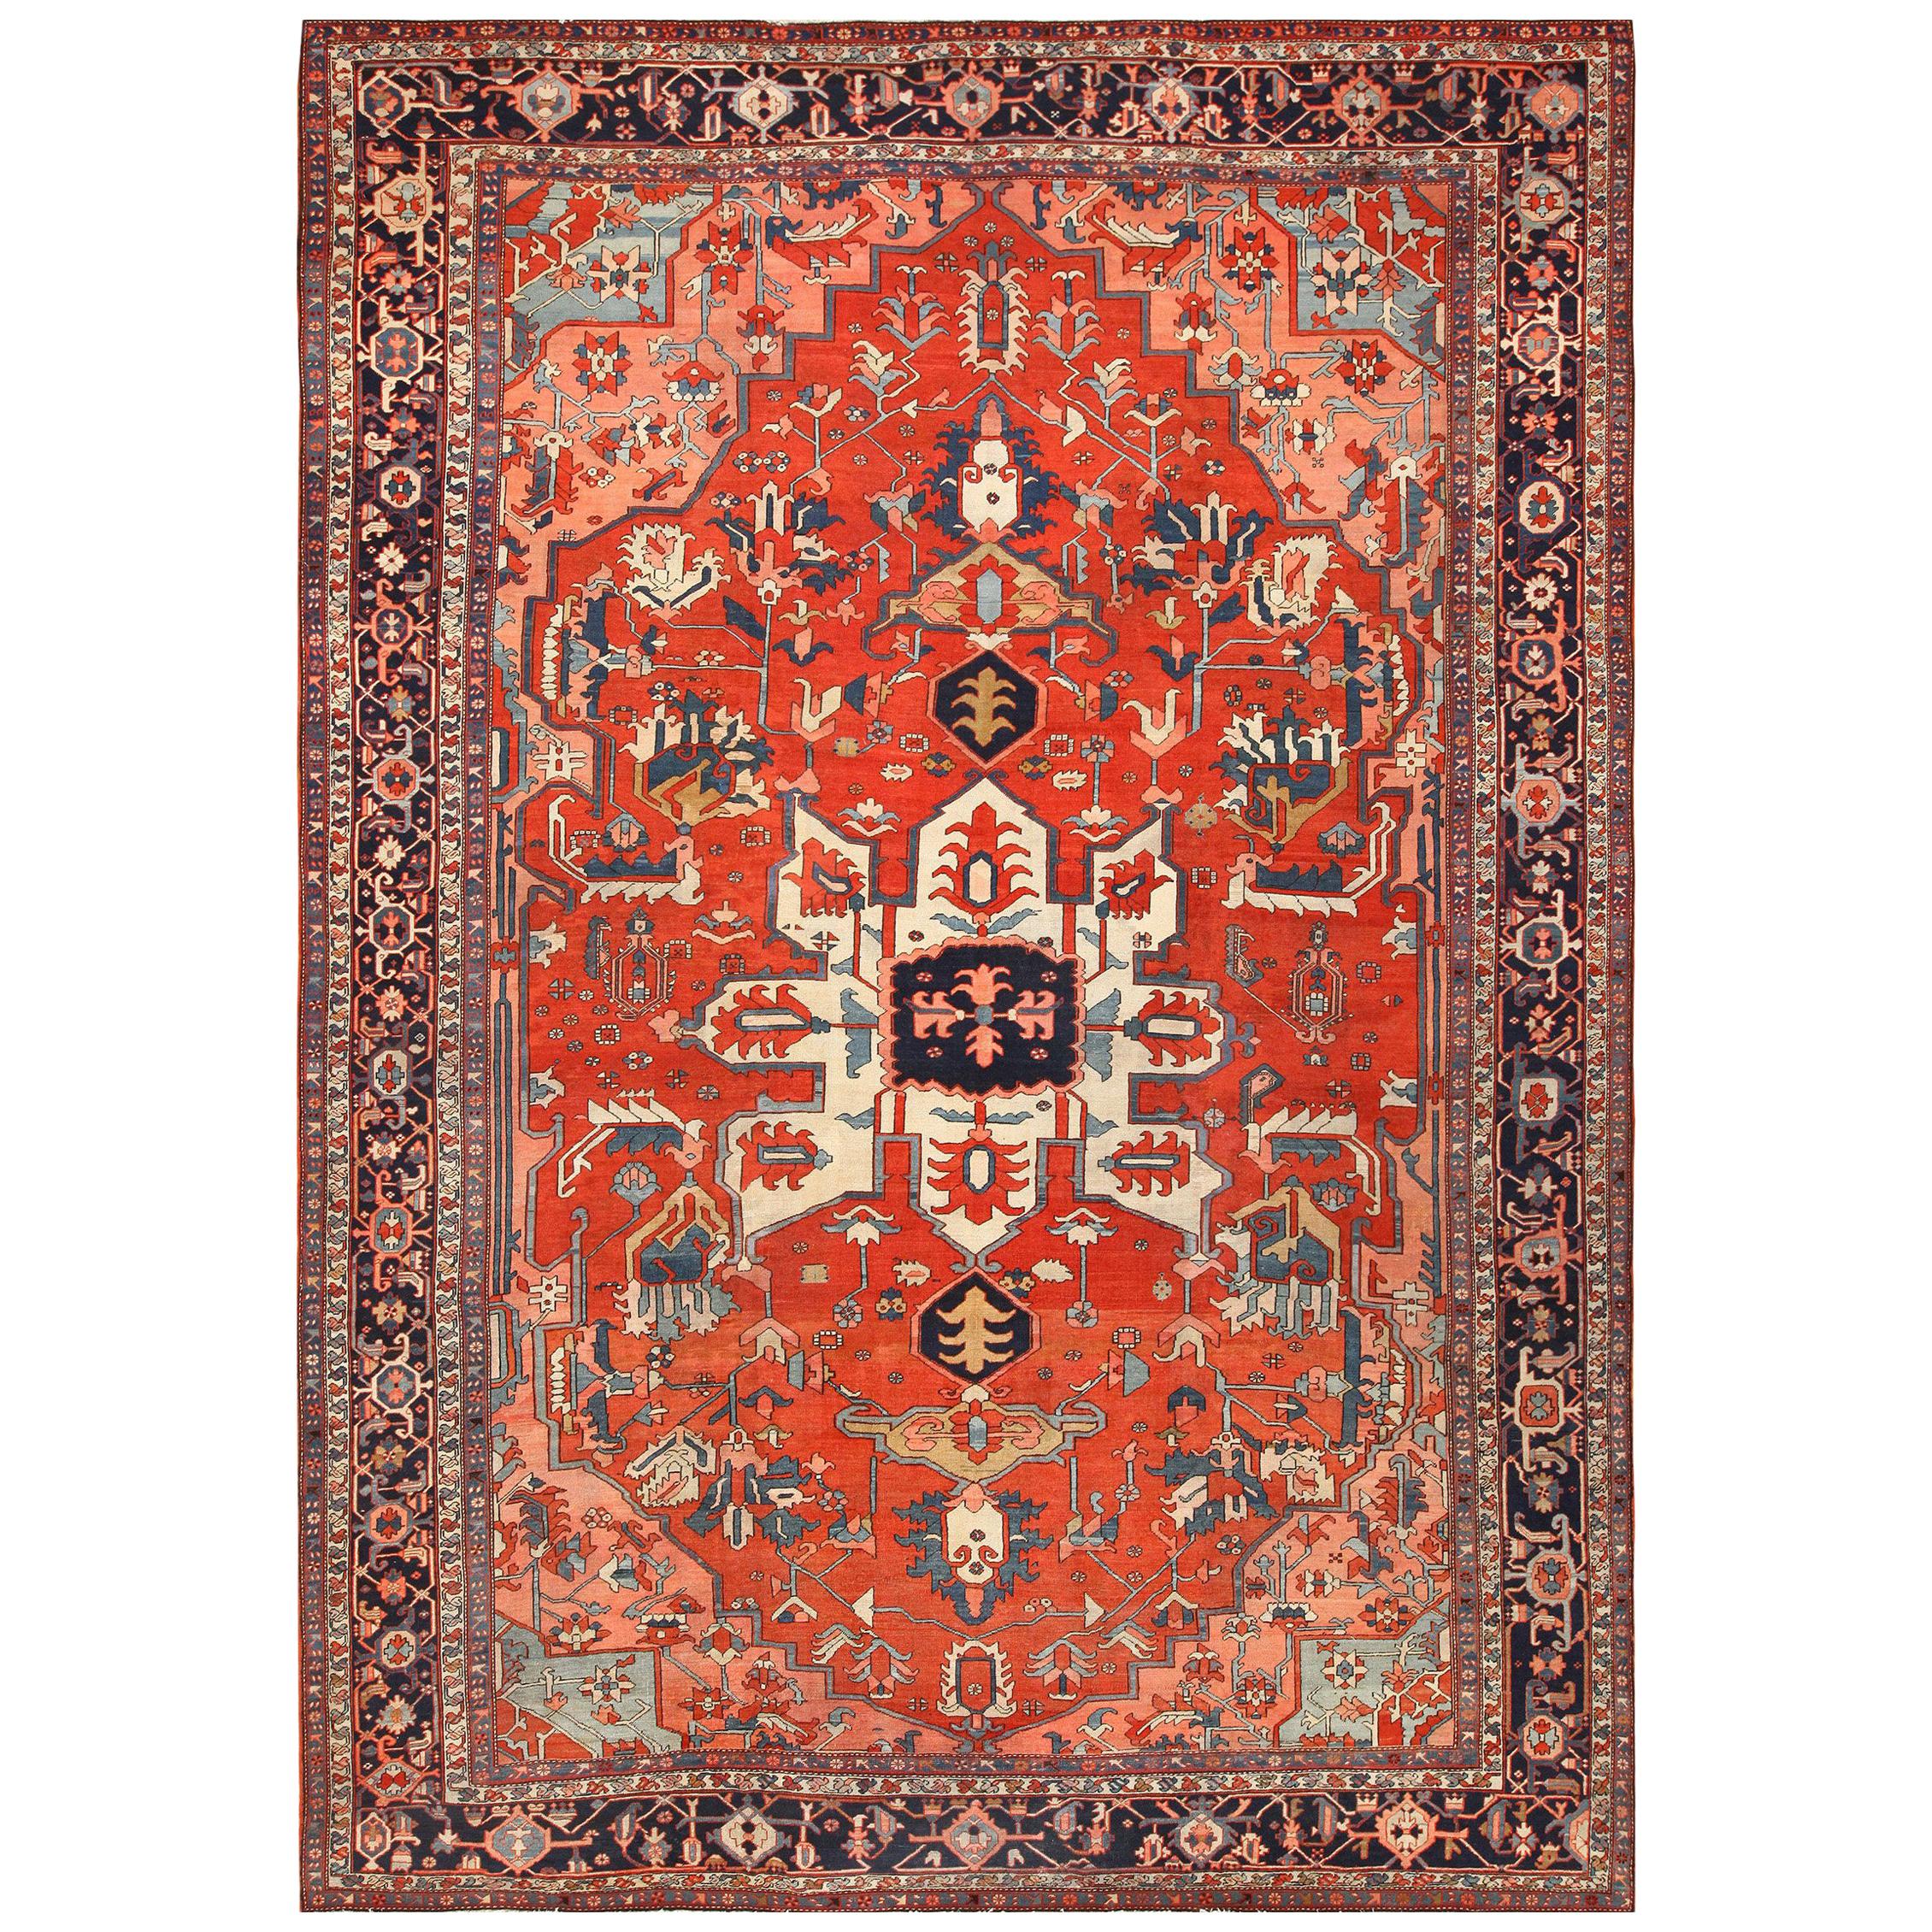 Antique Serapi Persian Rug. Size: 12 ft x 17 ft 6 in For Sale